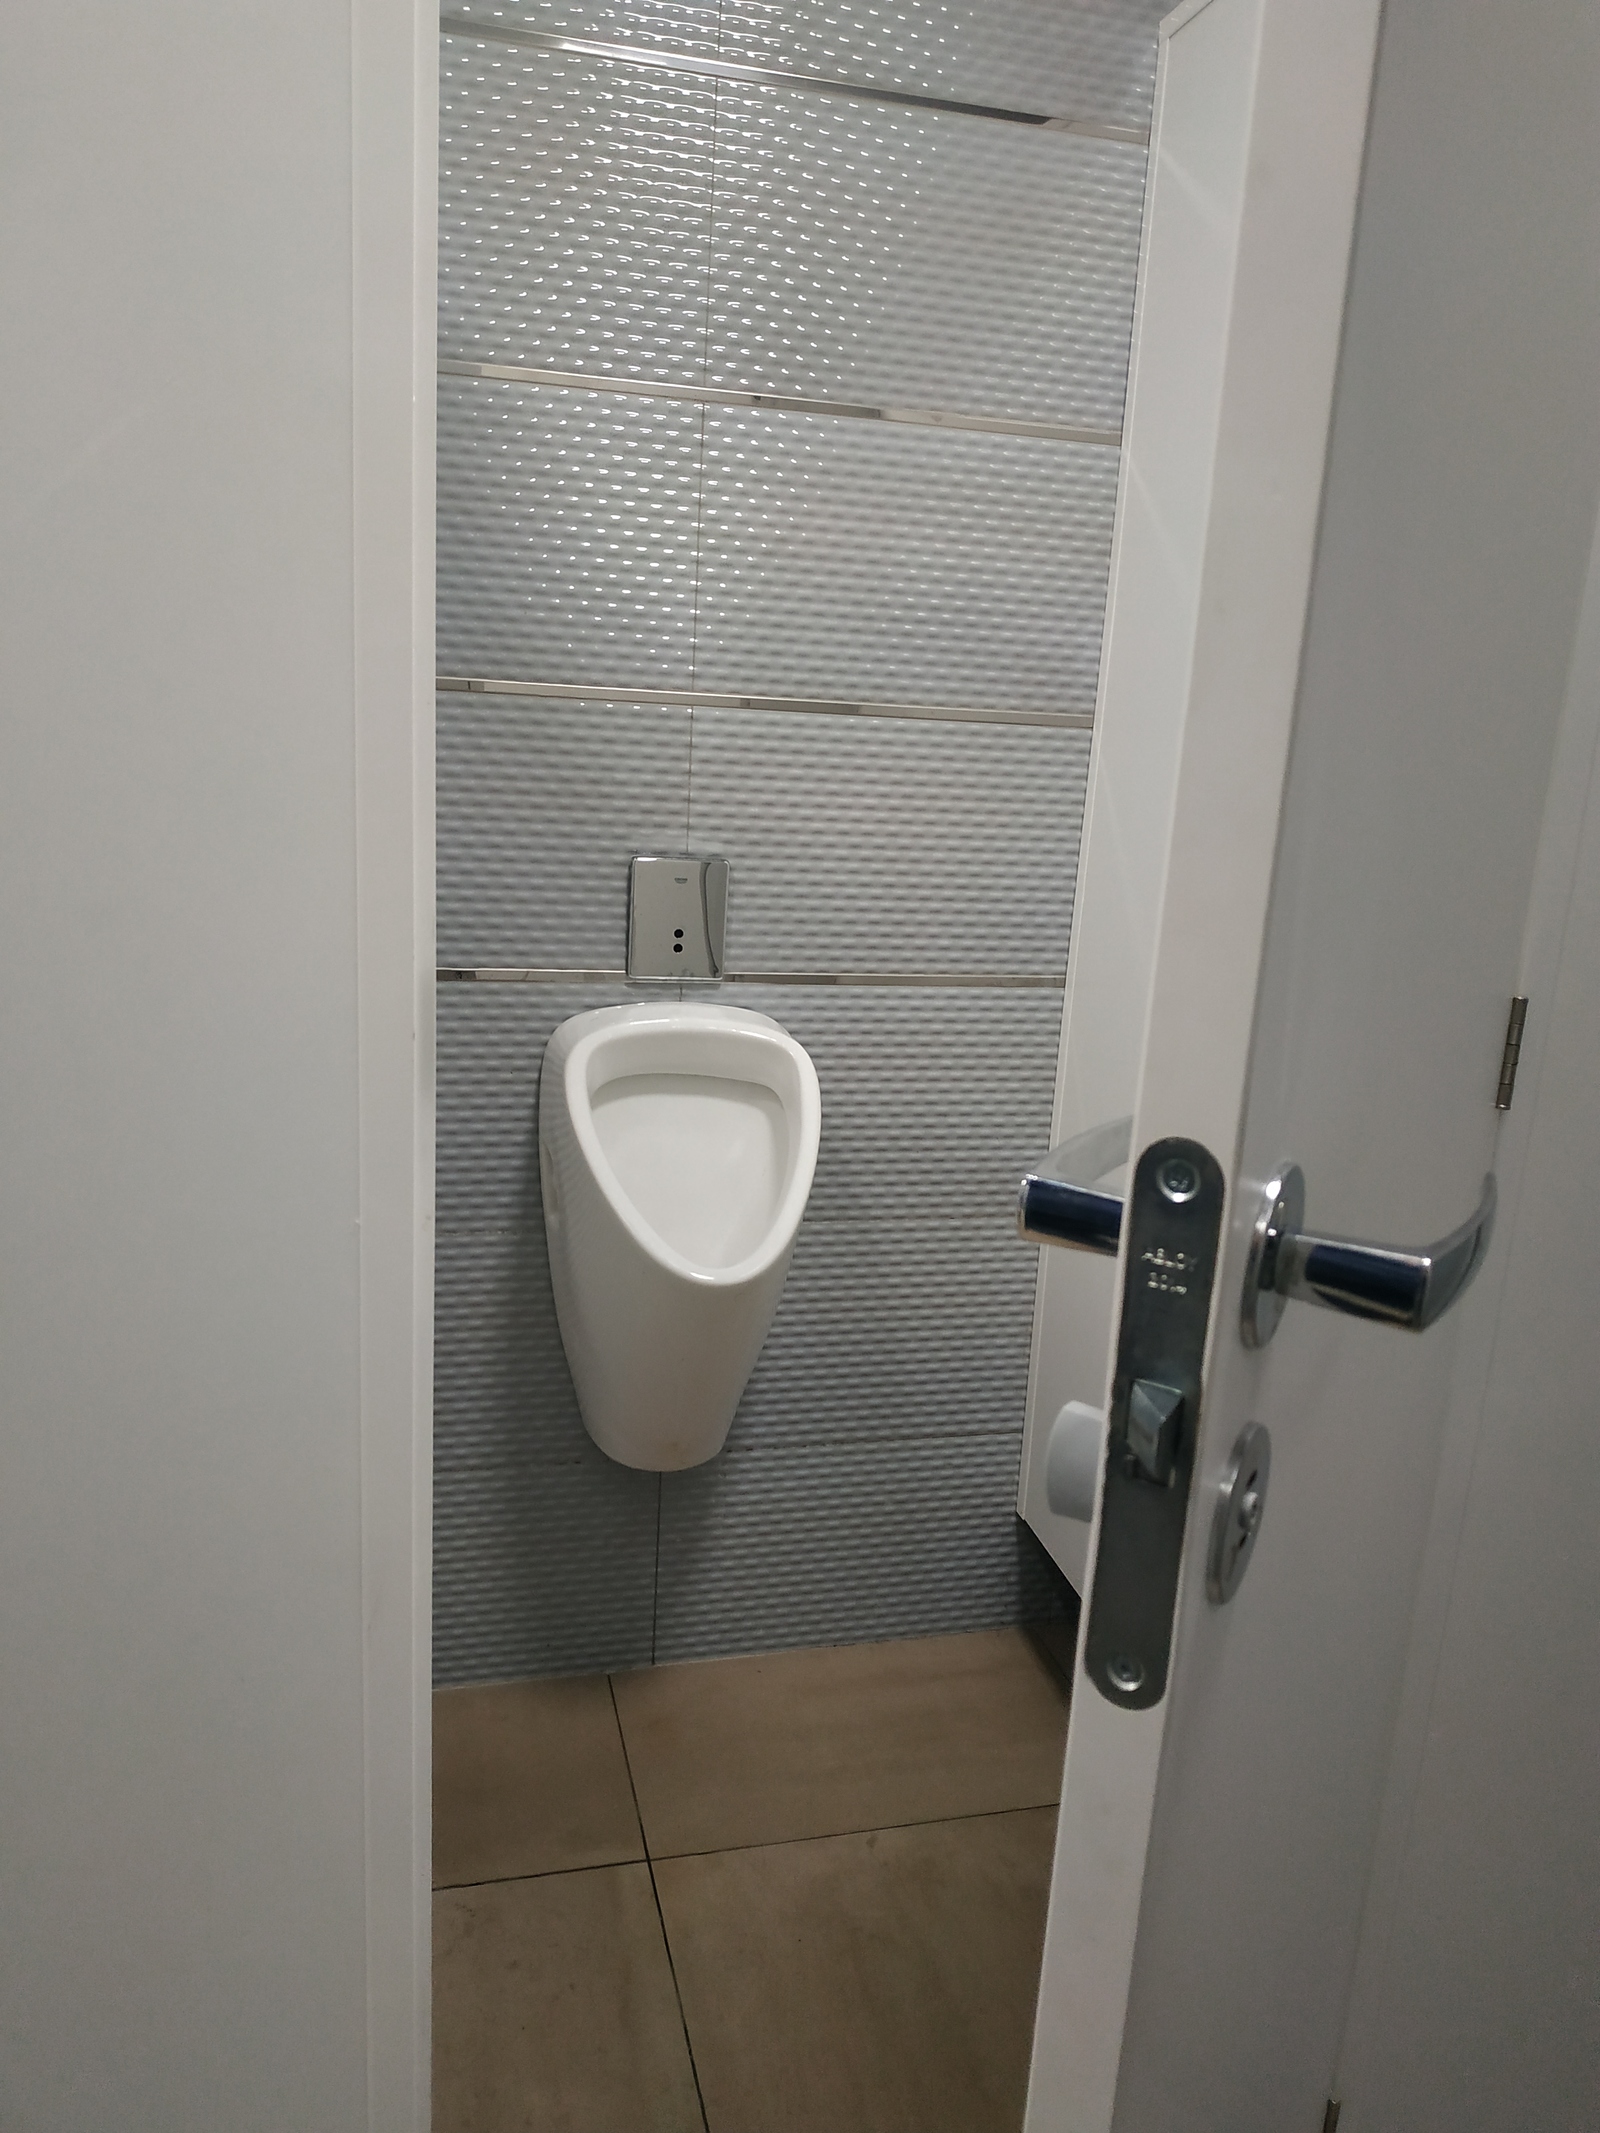 Introvert's urinal - My, Introvert, Privacy, Grief builders, Design